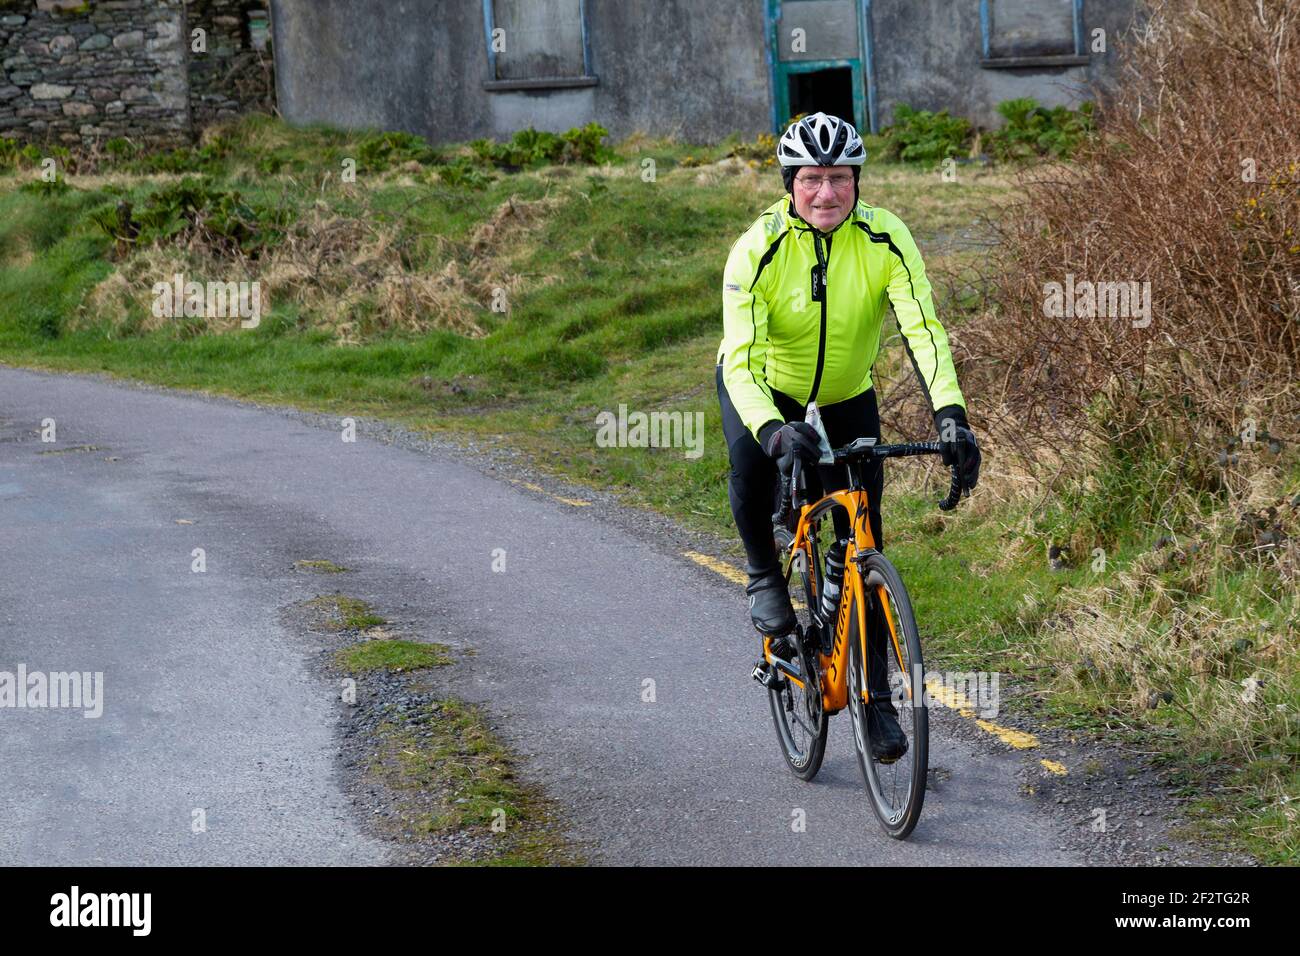 Co. Kerry, Ireland. 13th Mar 2021. Priest distributing shamrock on St. Patrick's Day to Parishioners by Bicycle, County Kerry, Ireland Credit: Stephen Power/Alamy Live News Stock Photo